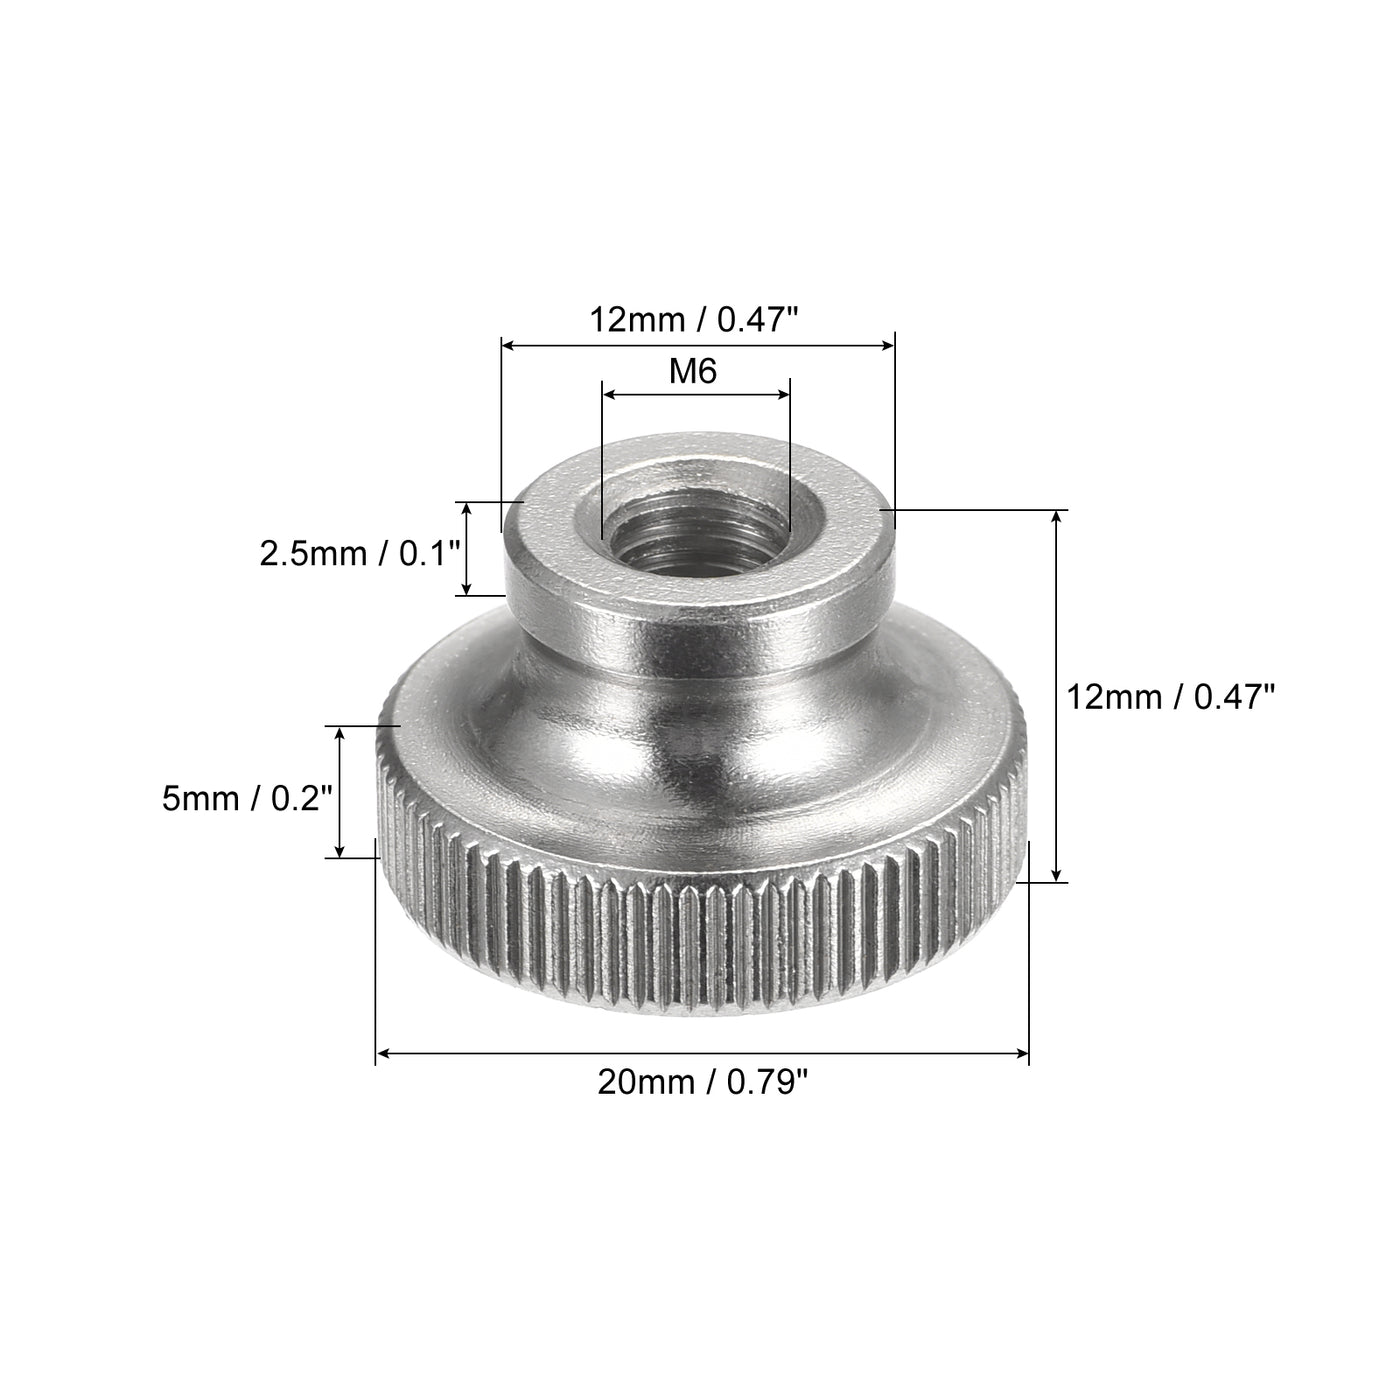 uxcell Uxcell Knurled Thumb Nuts, 10pcs M6 x D20mm x H12mm 304 Stainless Steel Blind Hole Nuts